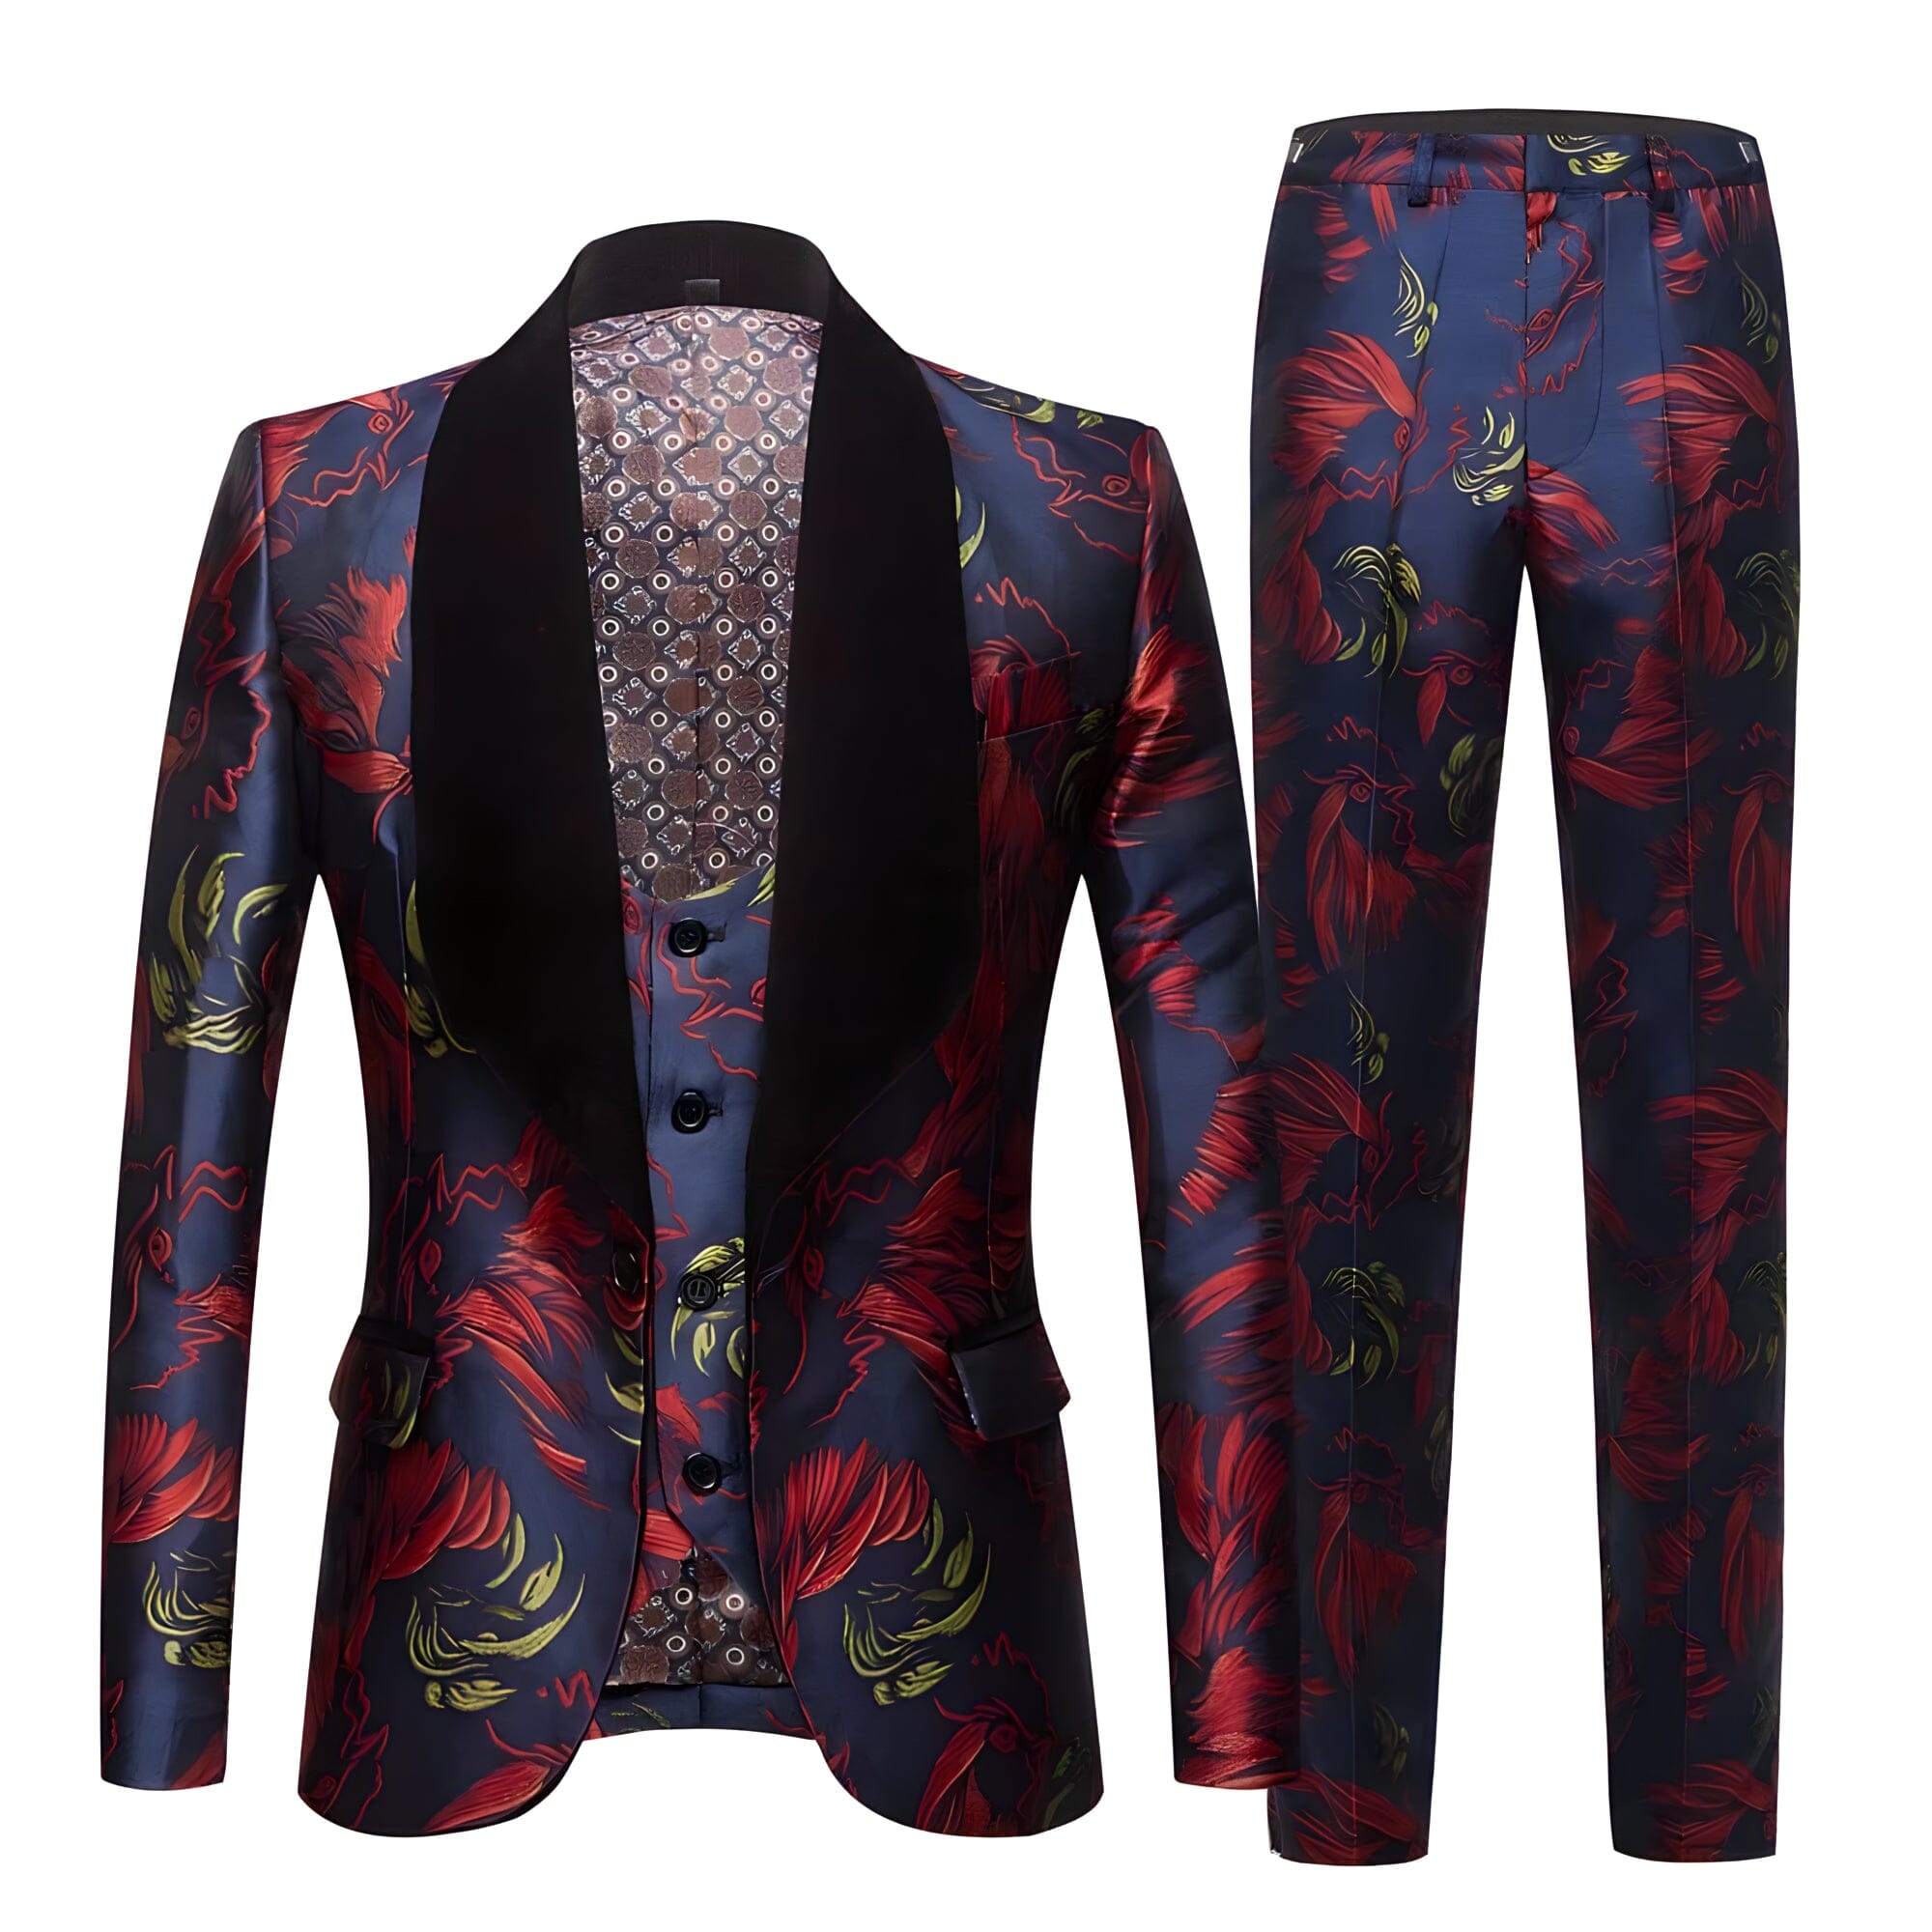 The Sorino Jacquard Slim Fit Two-Piece Suit - Multiple Colors WD Styles Blue 36 / XS 